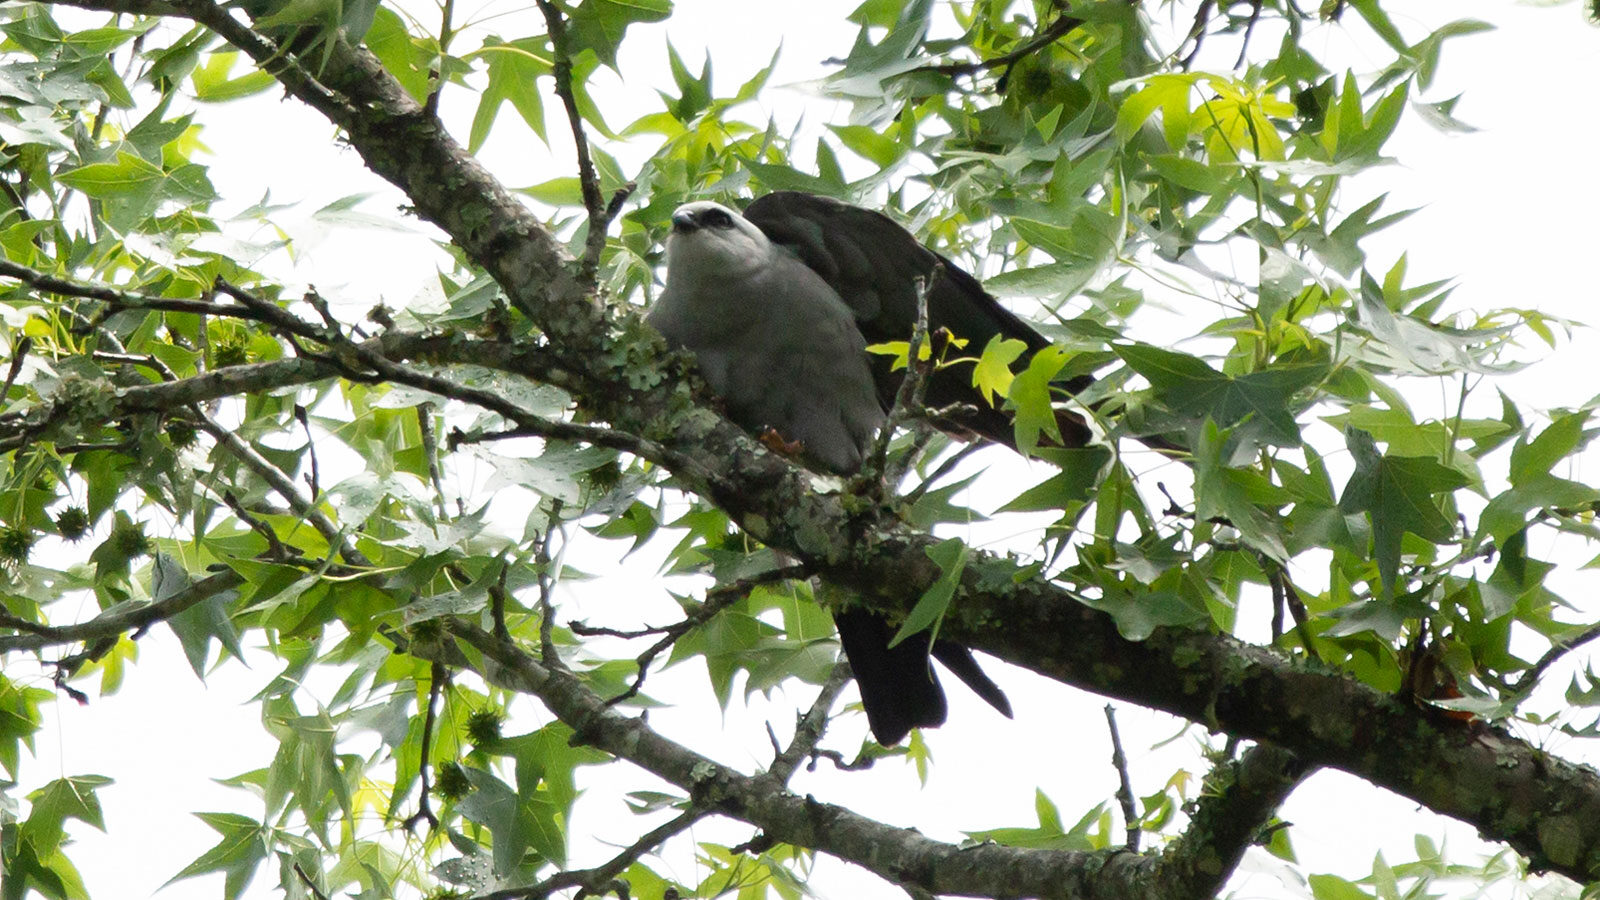 Adult Mississippi kite gearing up to take off from a tree branch